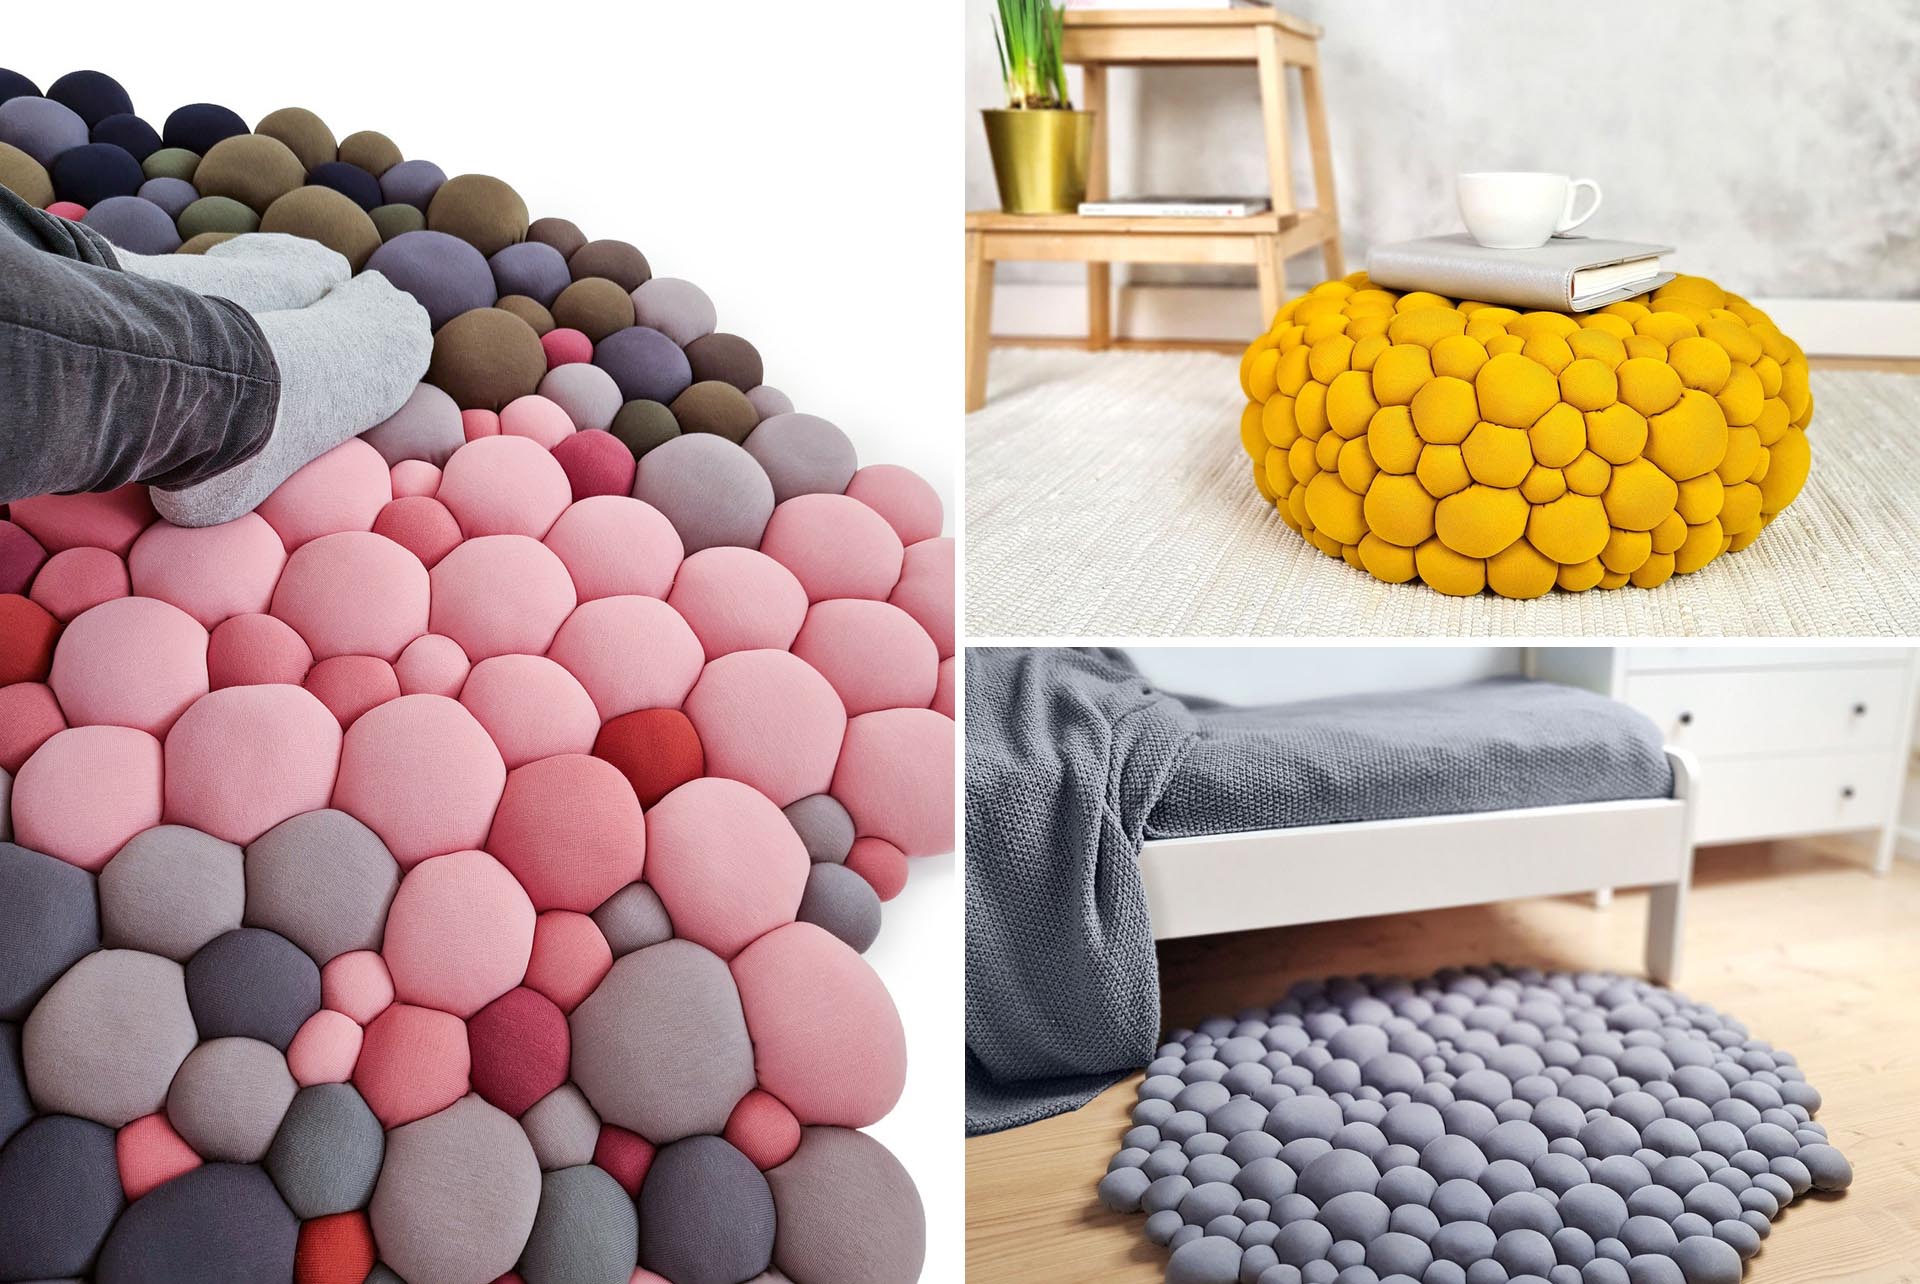 A collection of modern home decor pieces like ottomans and rugs, whose design is inspired by stones.